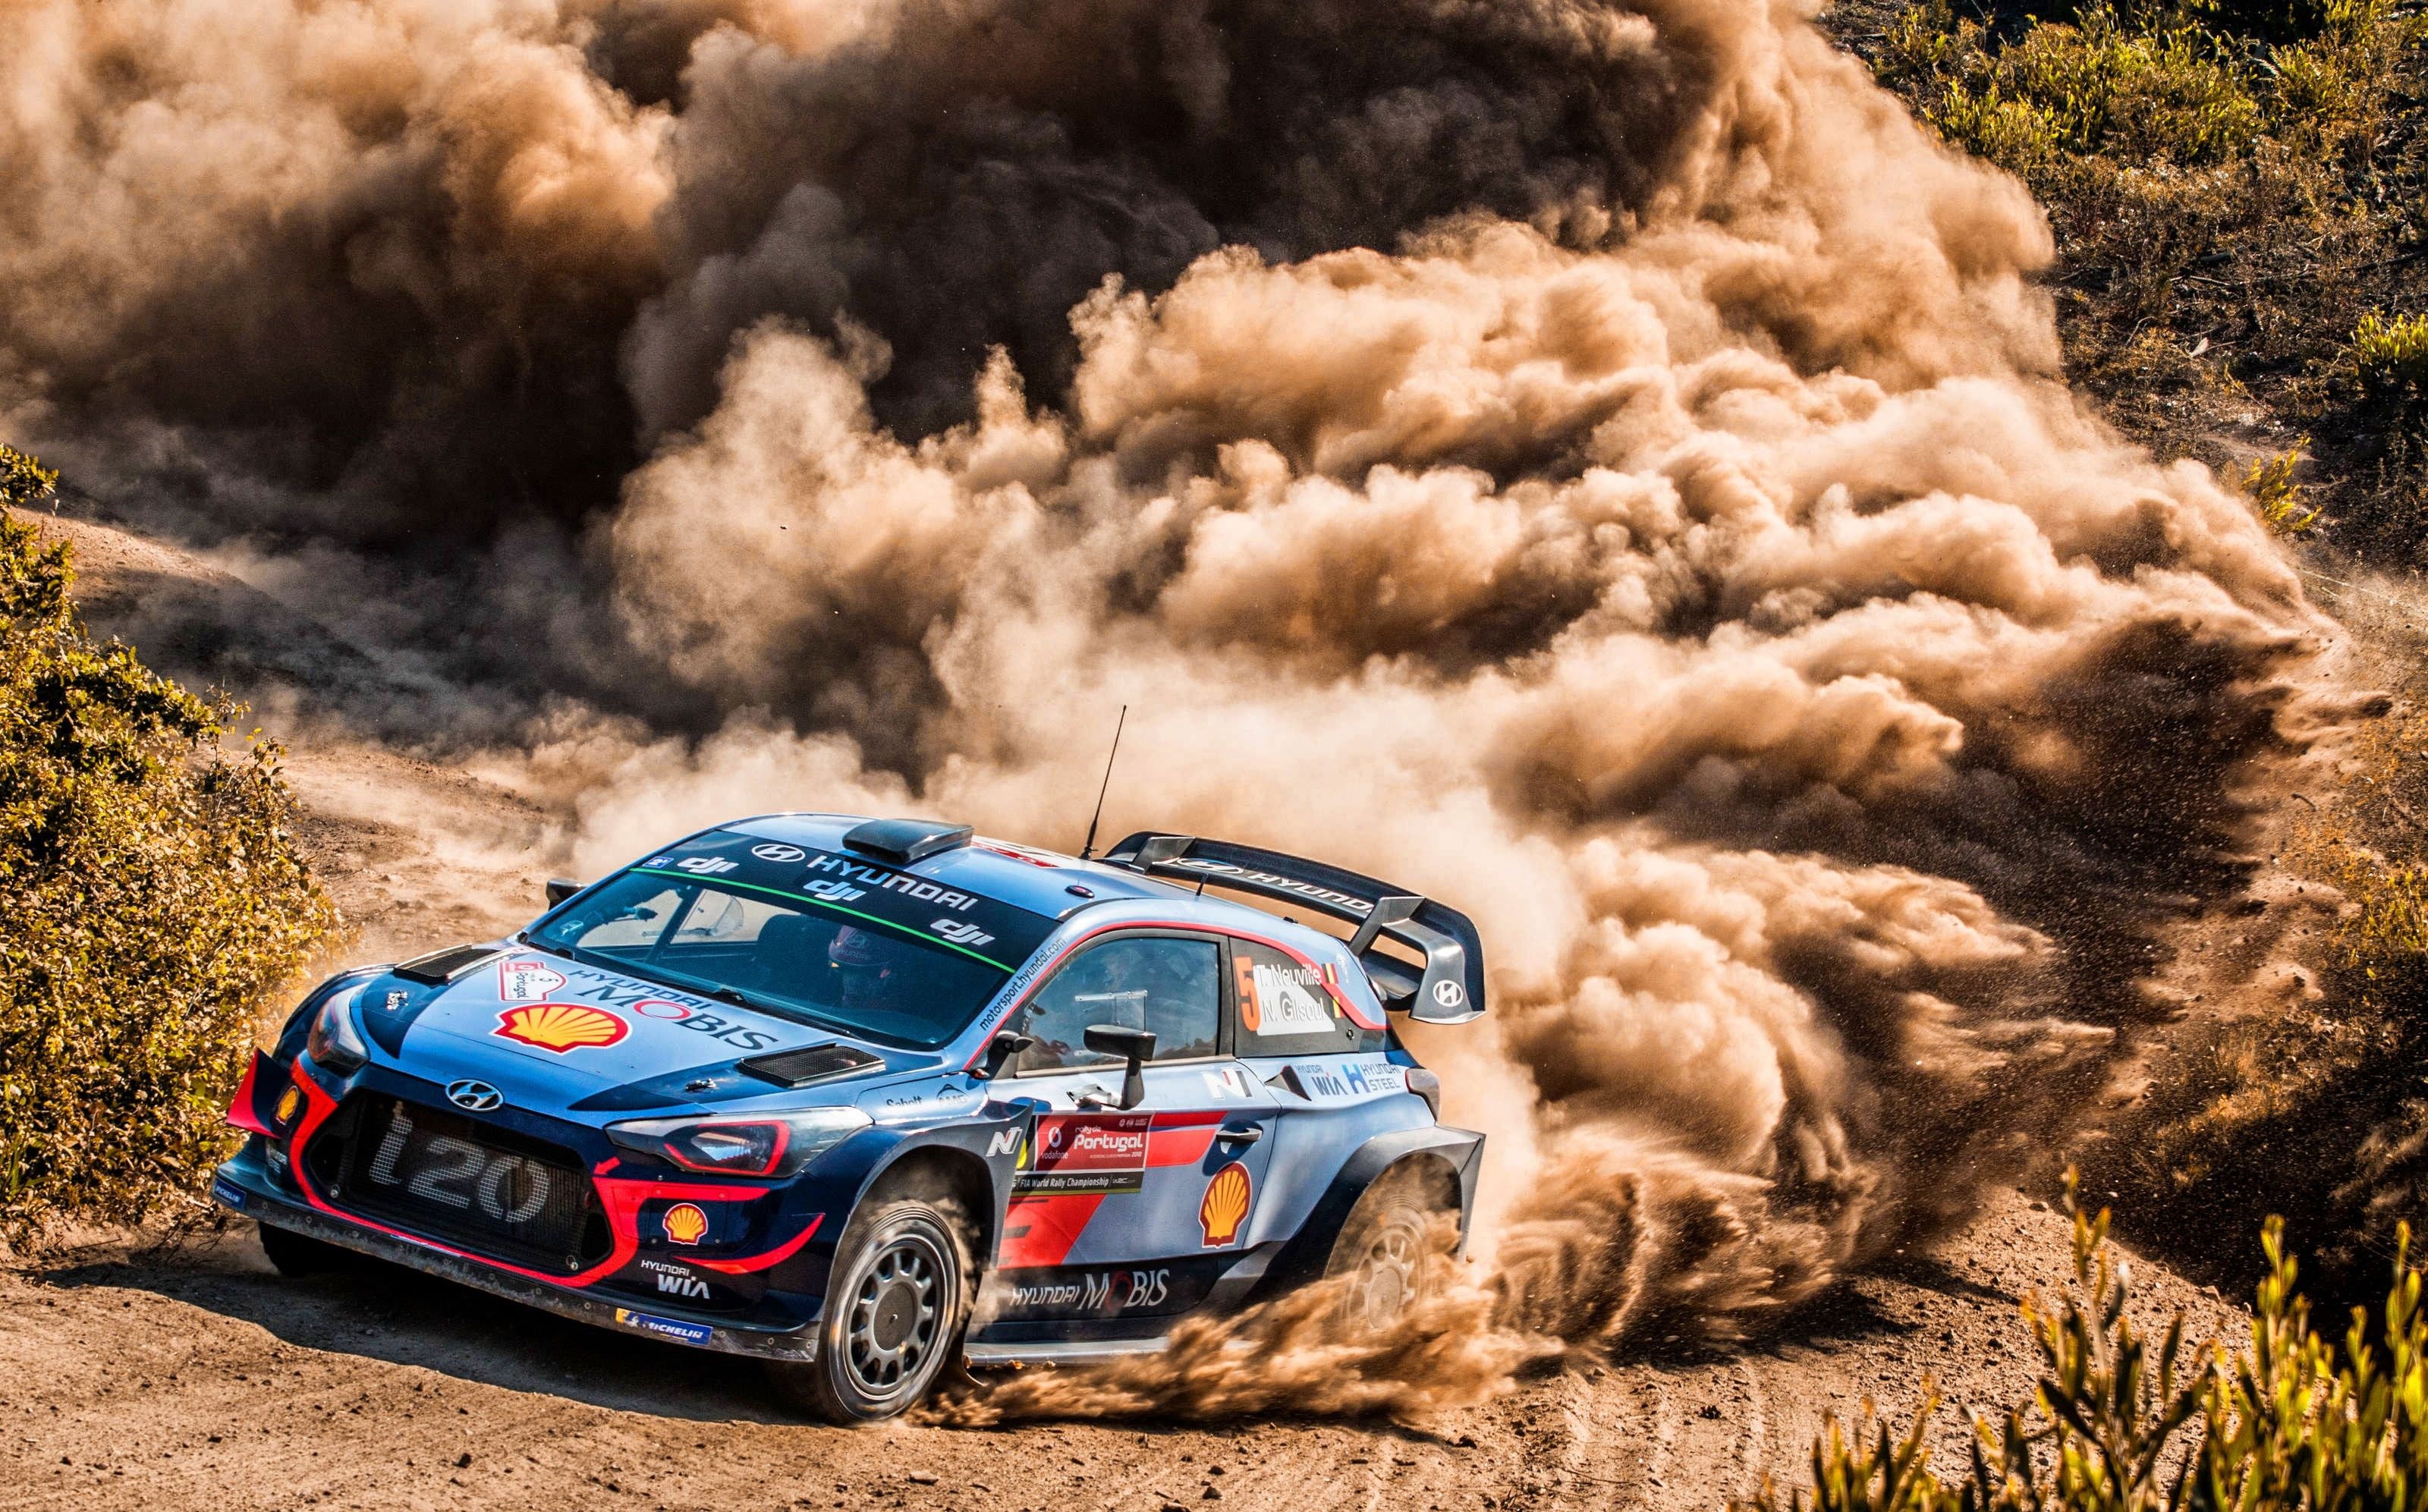 Rally Raid: Dust Race, Skid, Hyundai, WRC, Rally, Off-Road Circuits, Auto Sports, Thierry Neuville, Rally Of Portugal 2018. 3200x2000 HD Background.